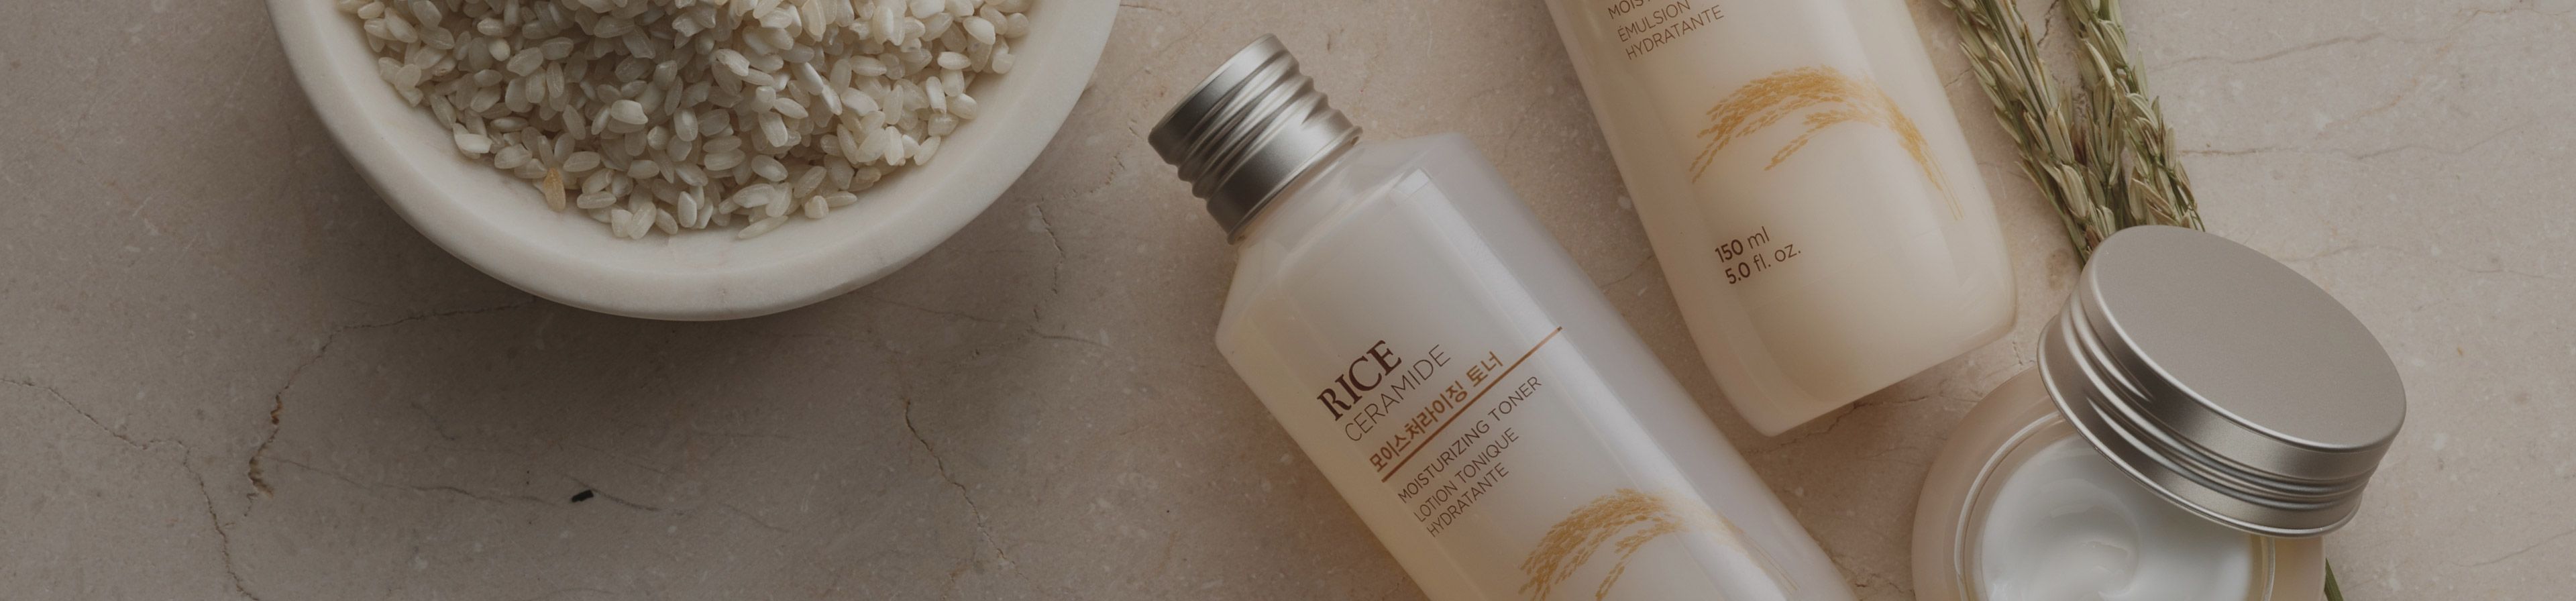 Two bottles and a jar of rice ceramide skincare products on a textured surface with rice grains and stalks nearby, emphasizing natural ingredients.